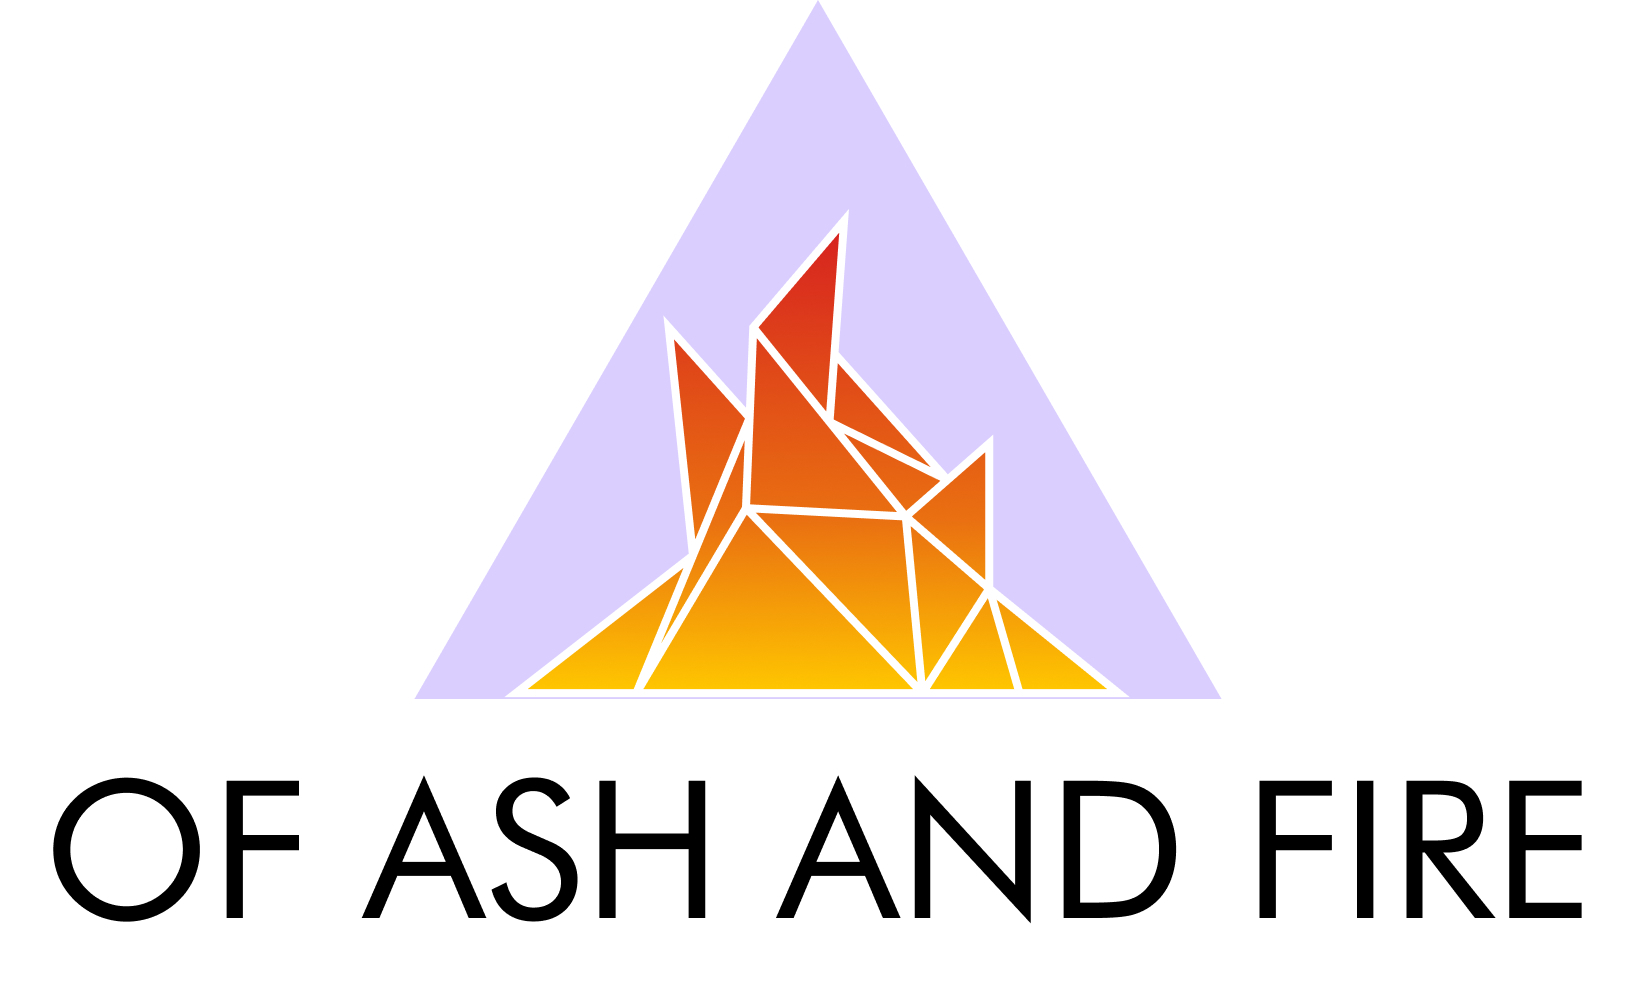 Of Ash and Fire